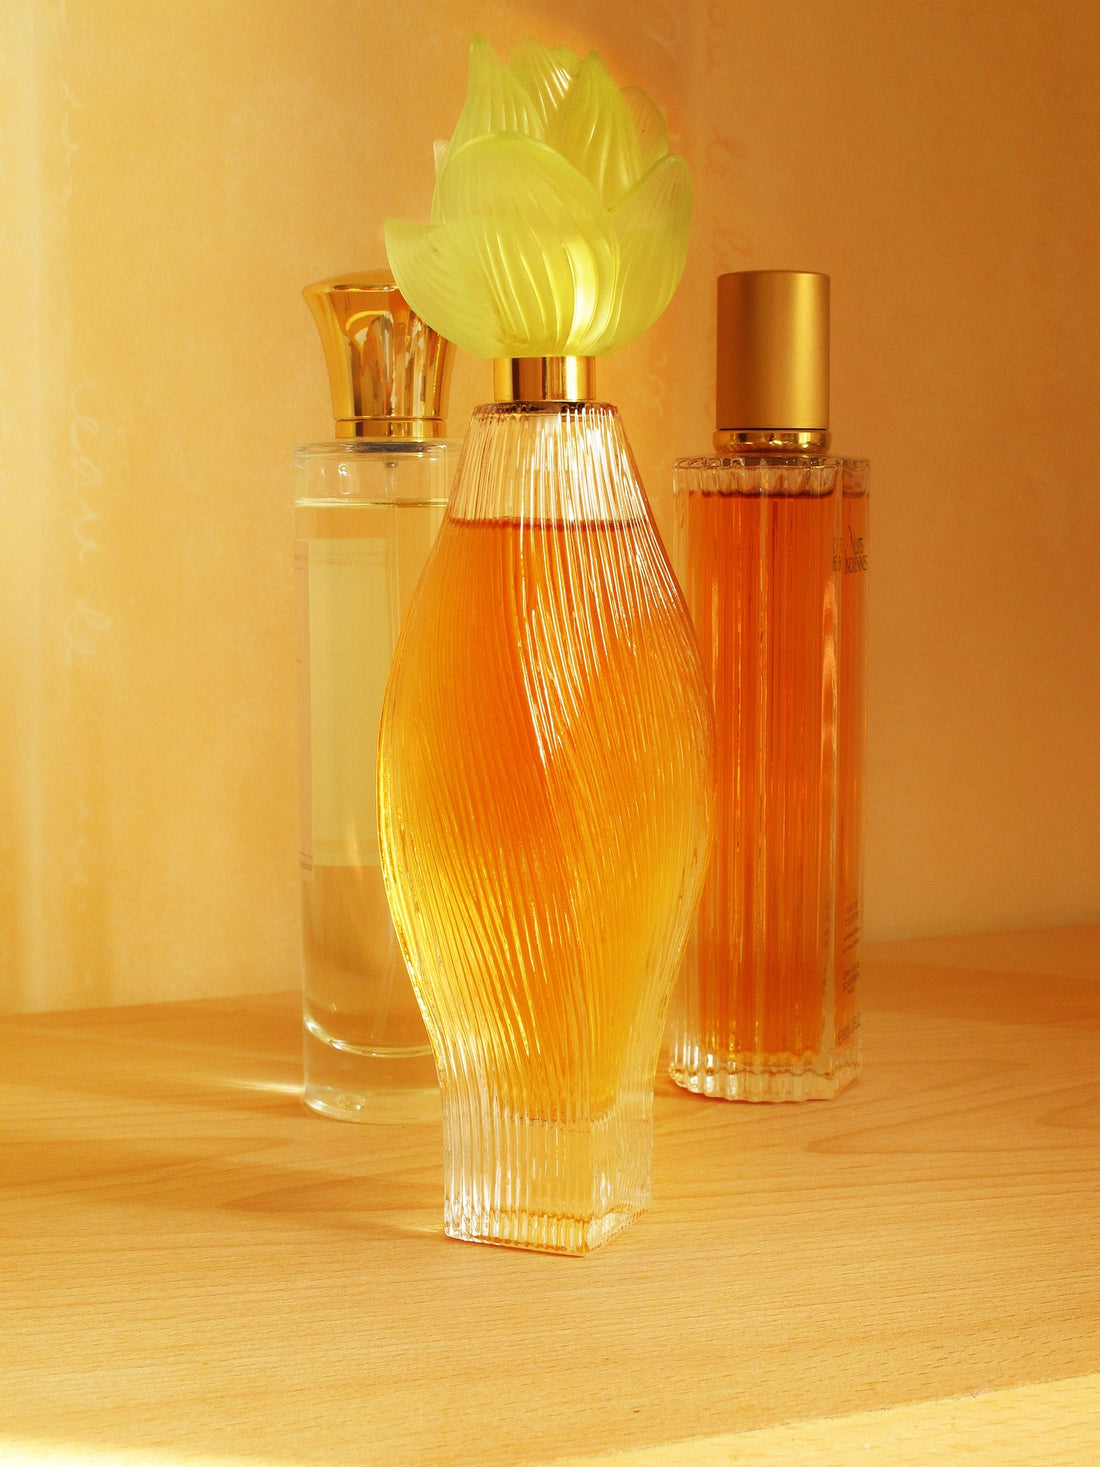 HOW TO STORE YOUR PARFUM